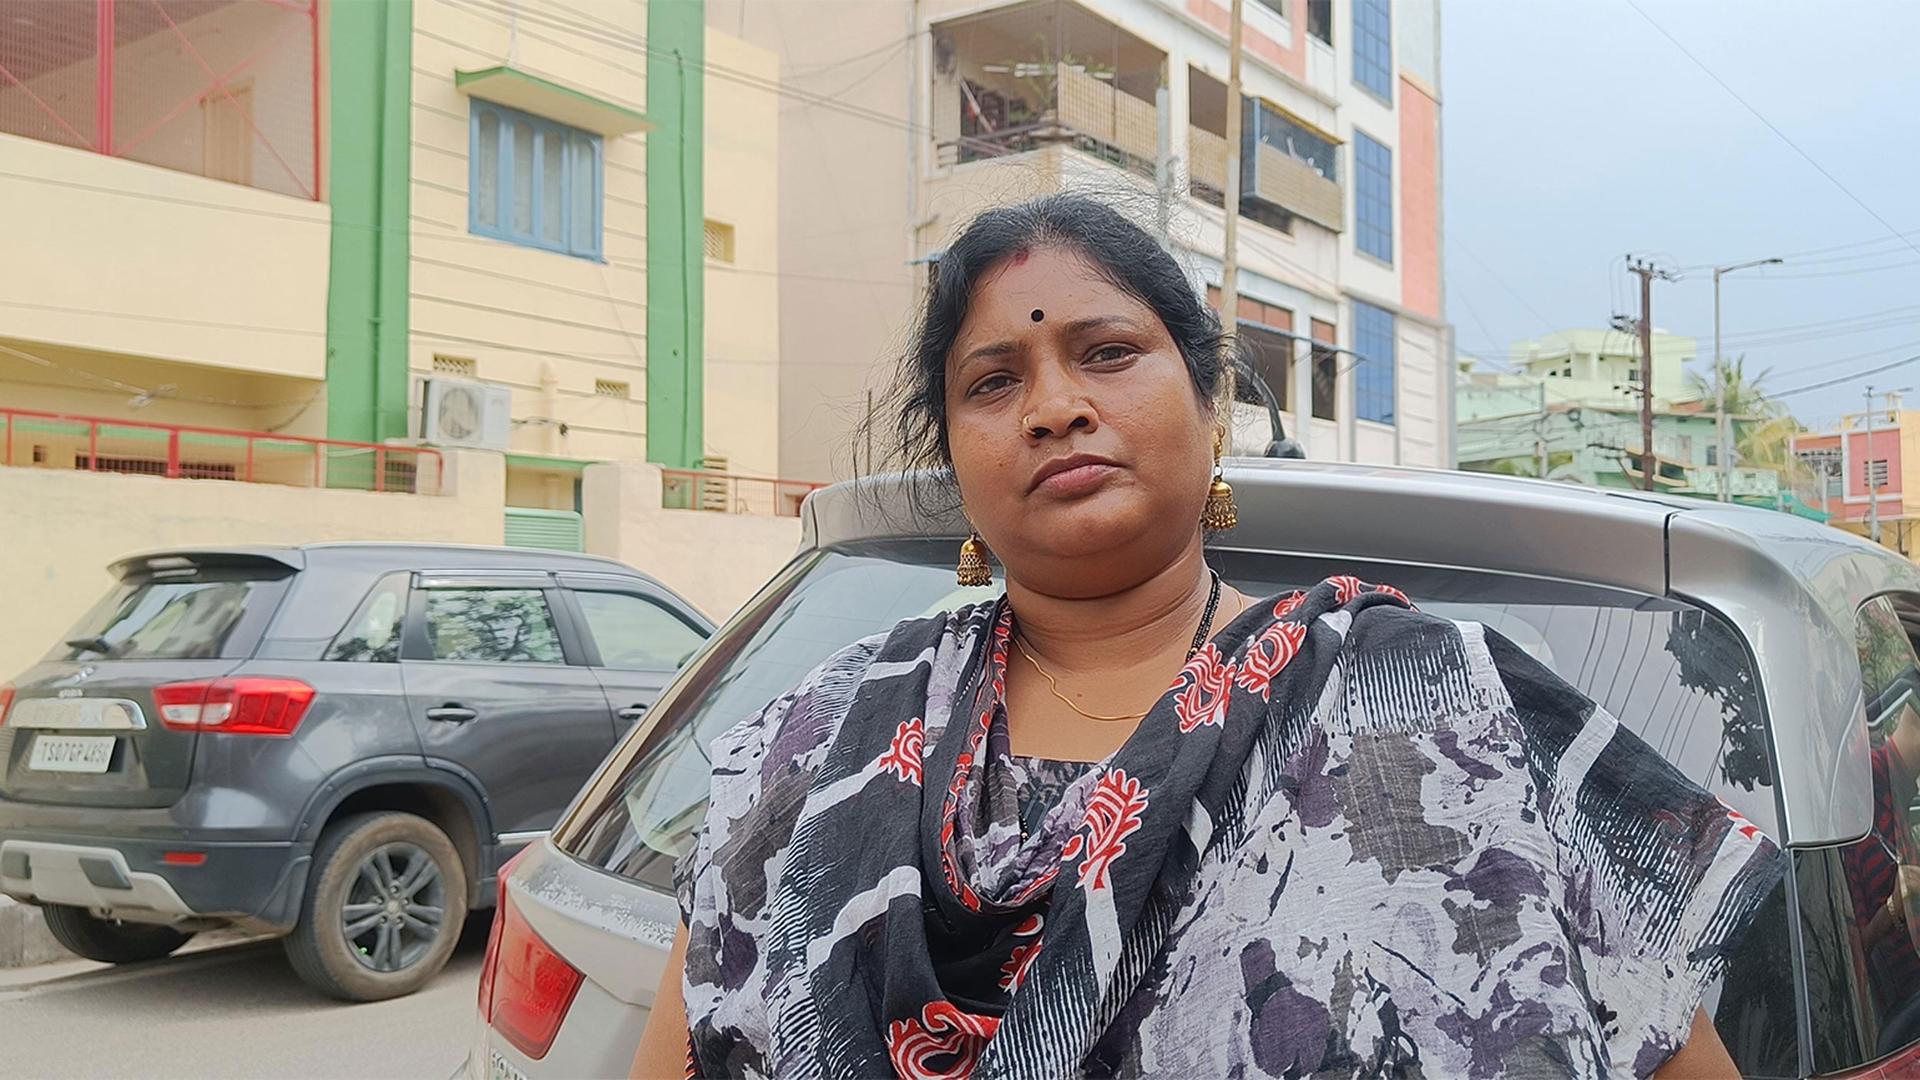 V Sailakshmi, 39, says sex work helped pay for her sister's wedding and for her father's funeral